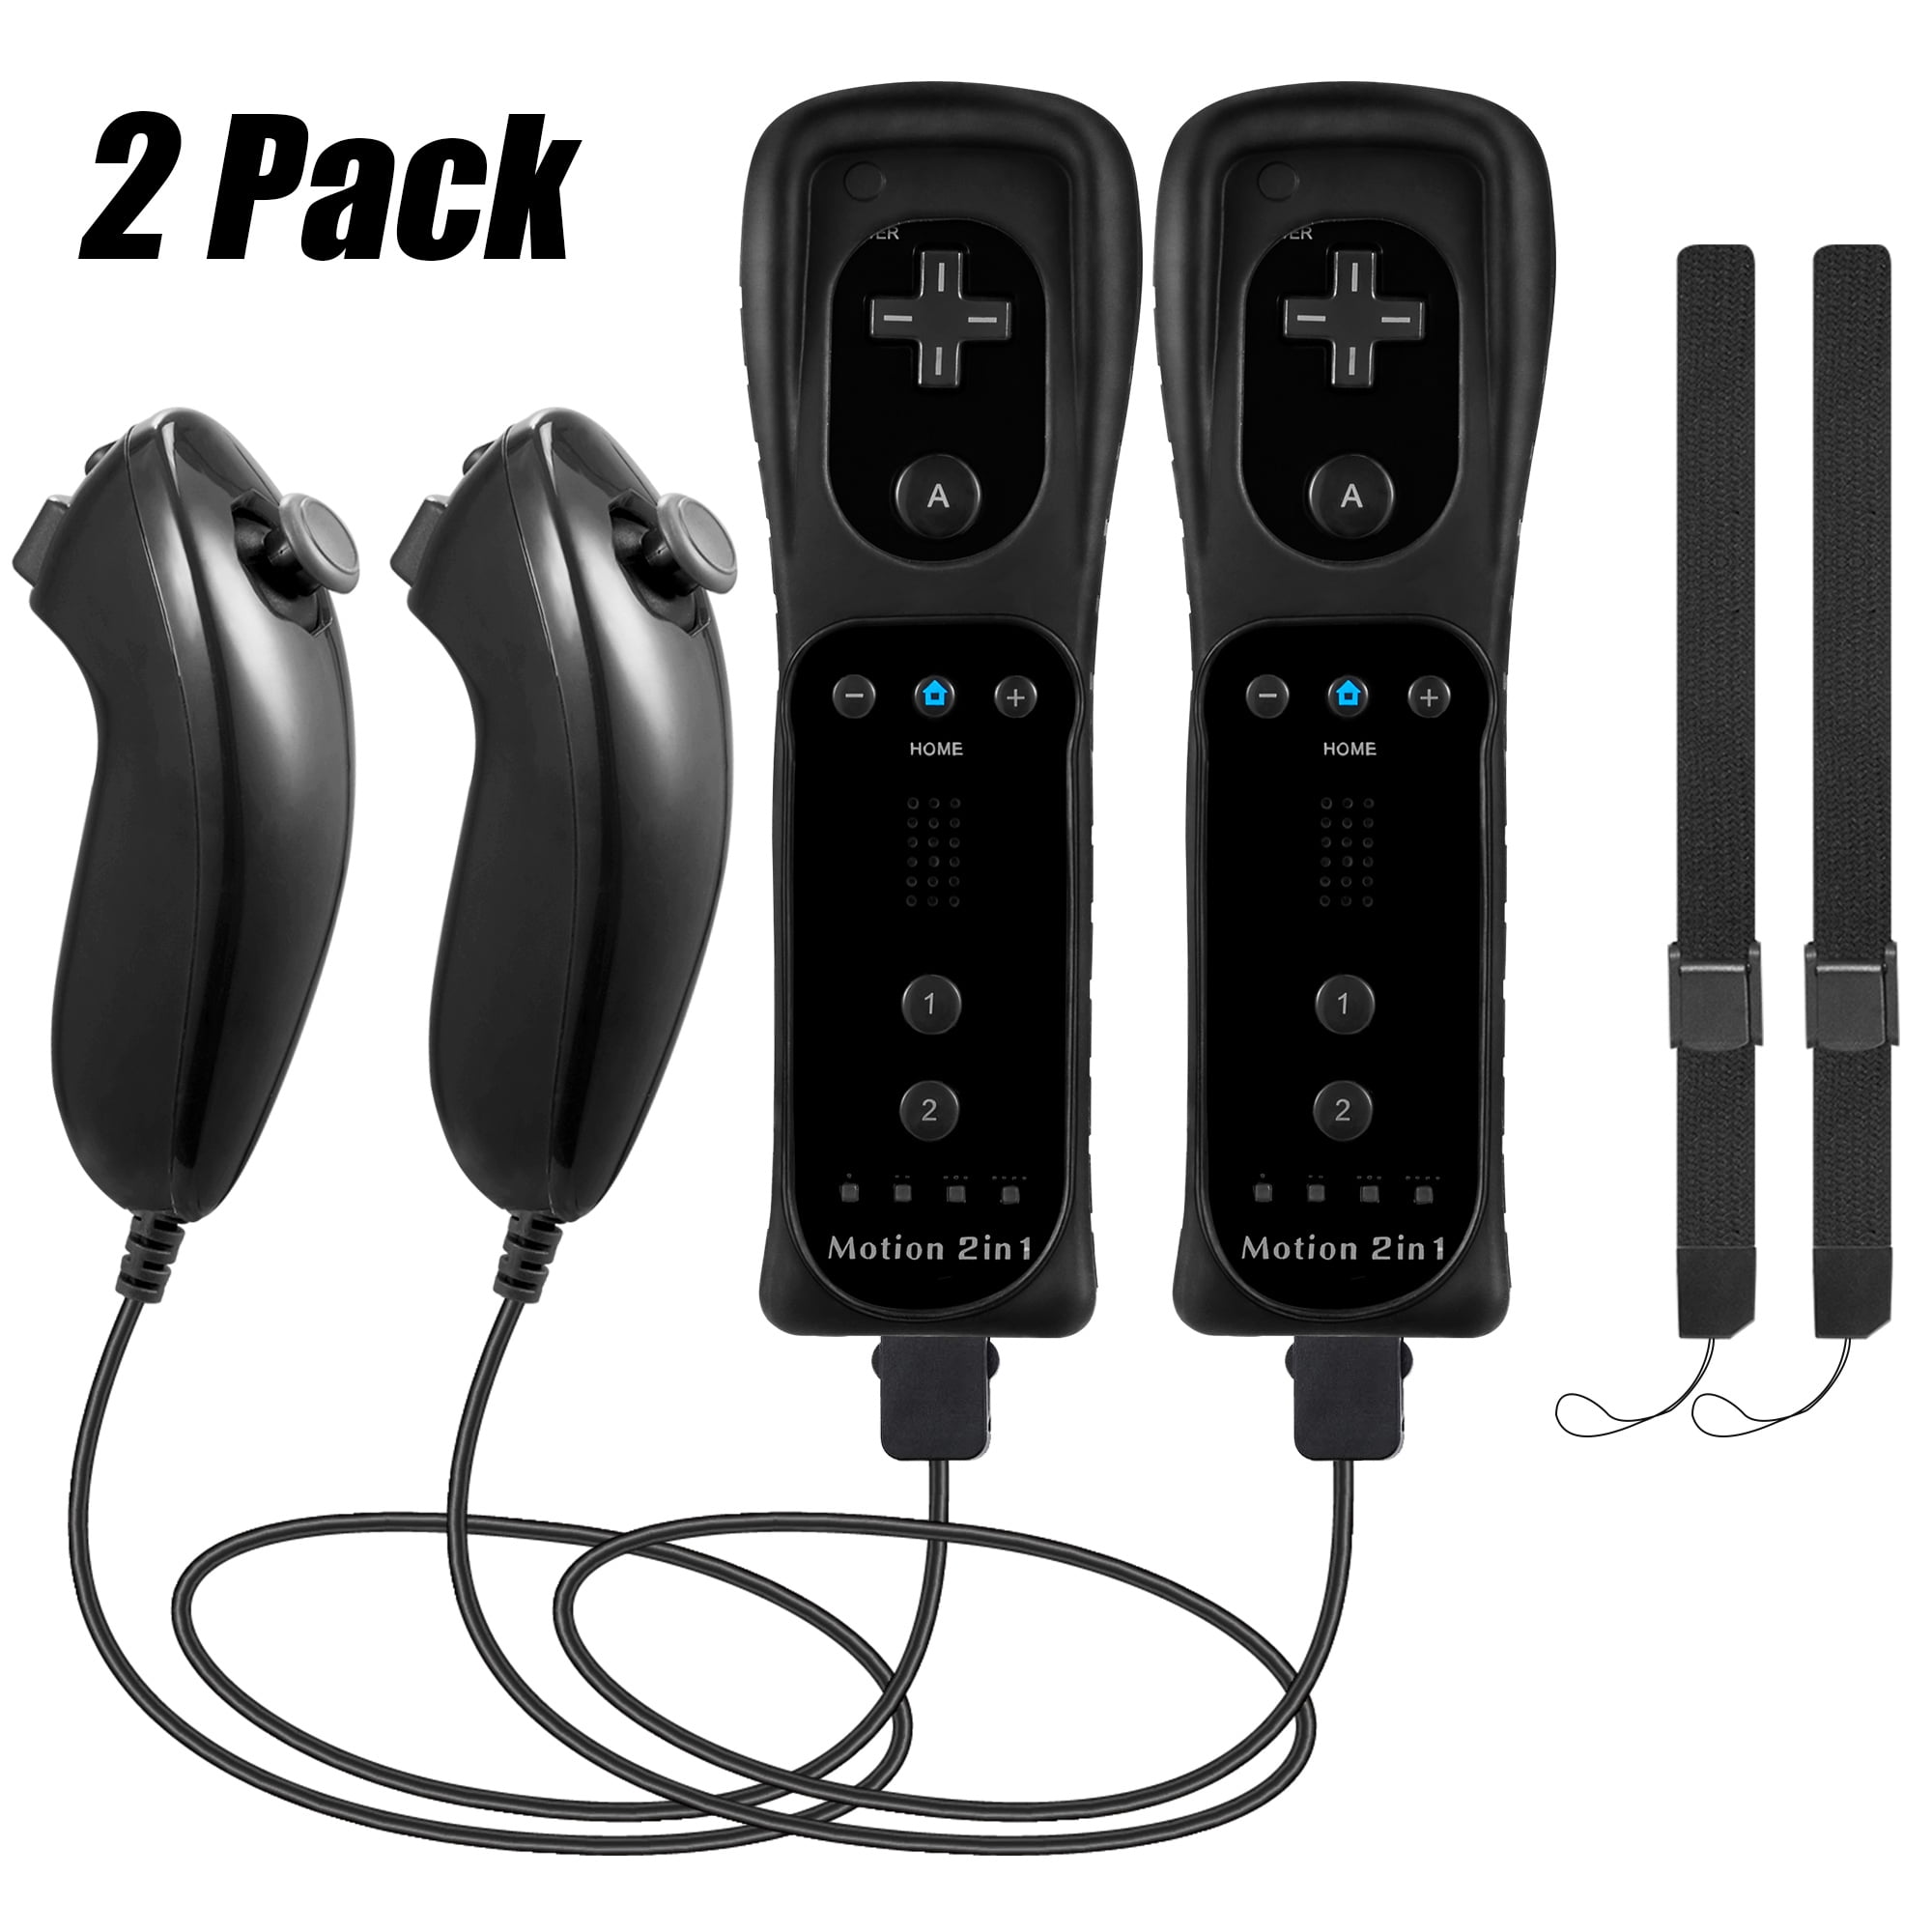 Luxmo Wii Nunchuck Controller Motion Plus, and Nunchuk Controller Compatible with Wii (U) Console Video Games(2 Pack) Walmart.com